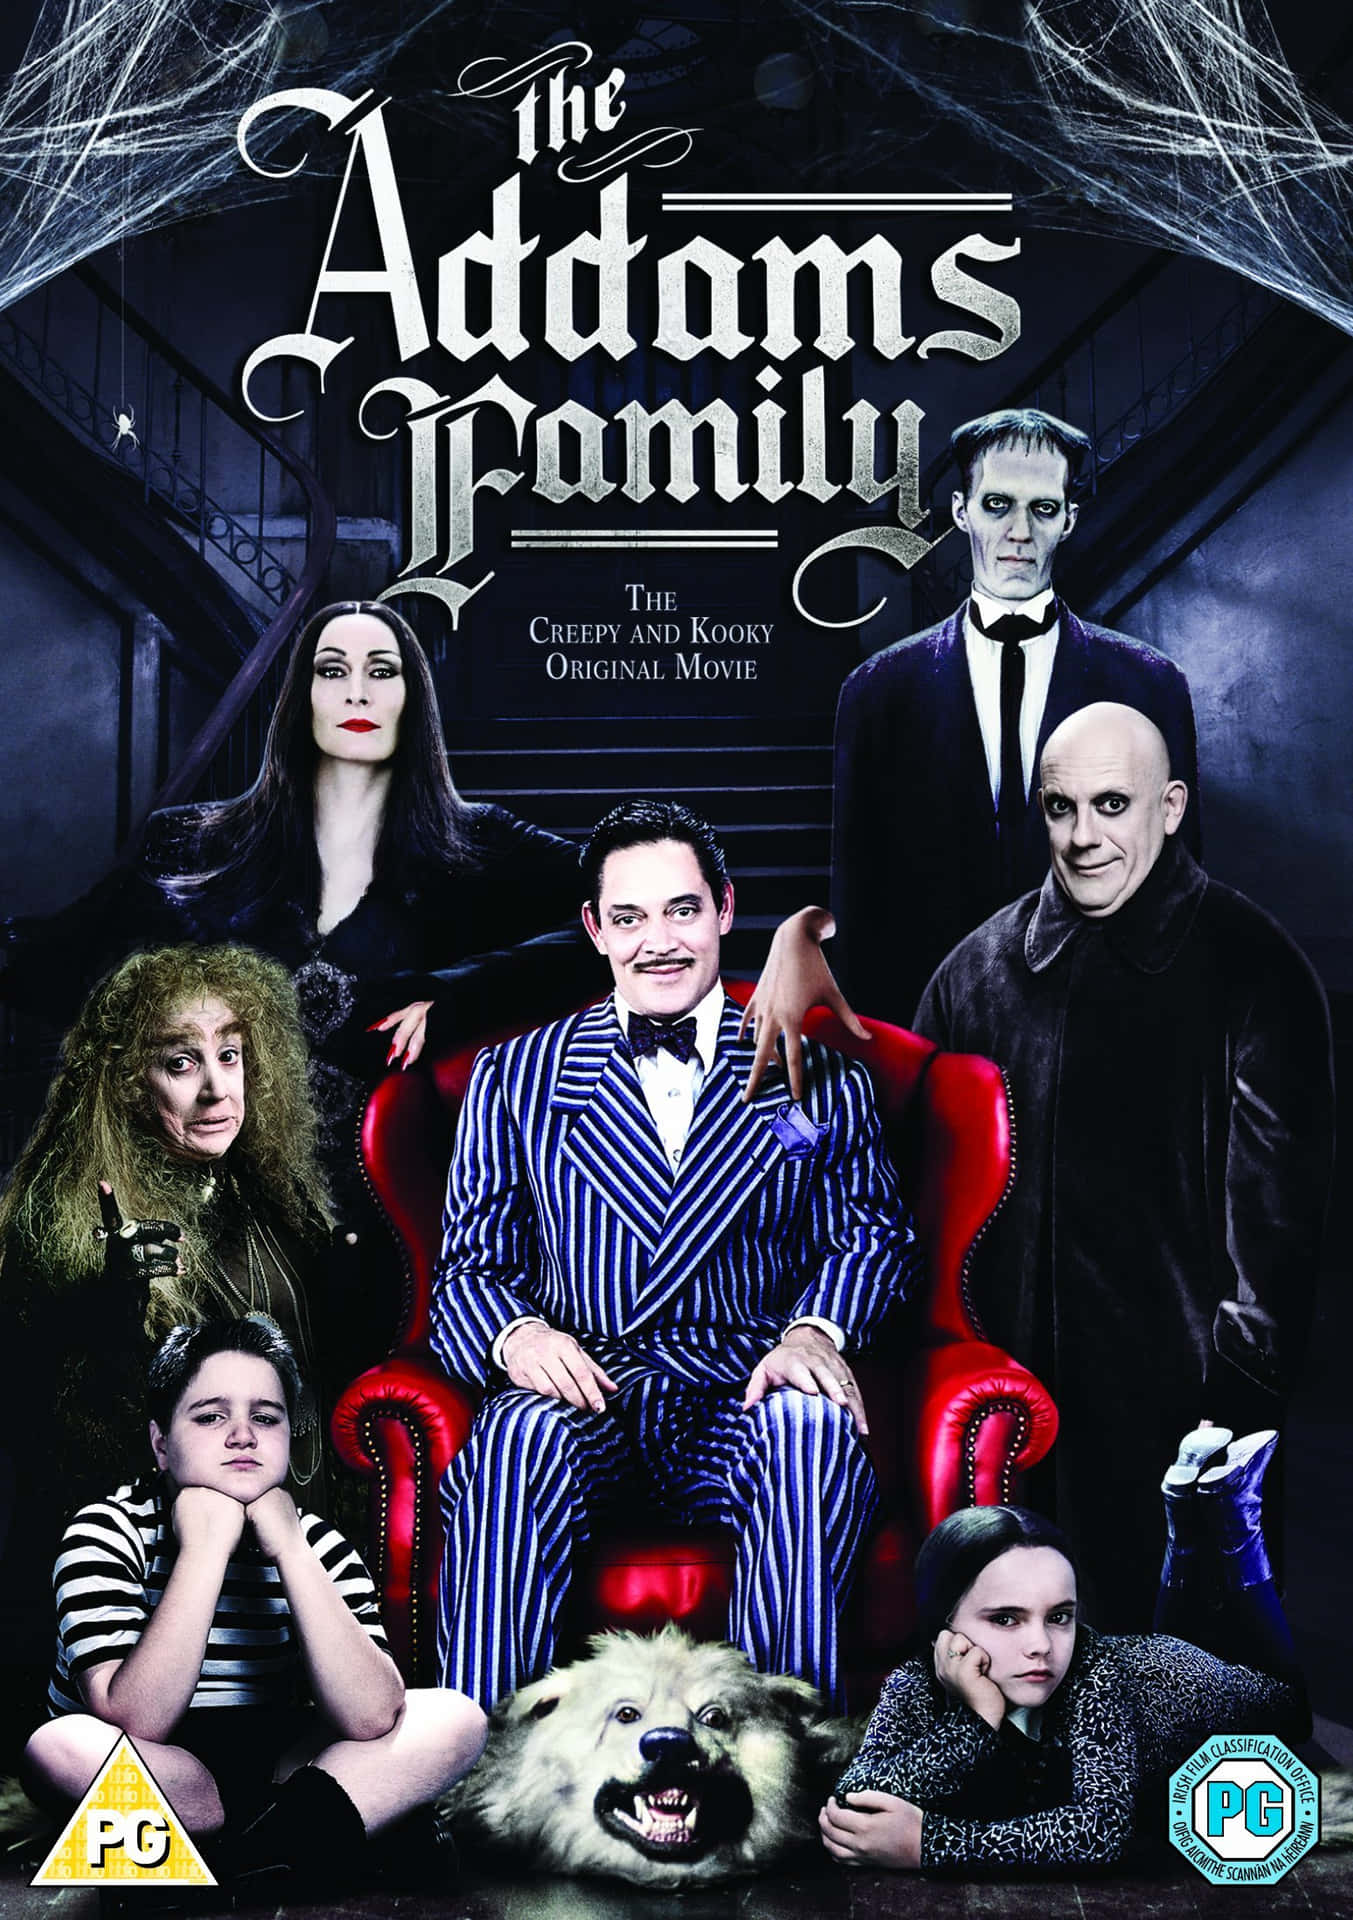 The Addams Family Convenes: Uncle Fester, Gomez, Wednesday and Morticia